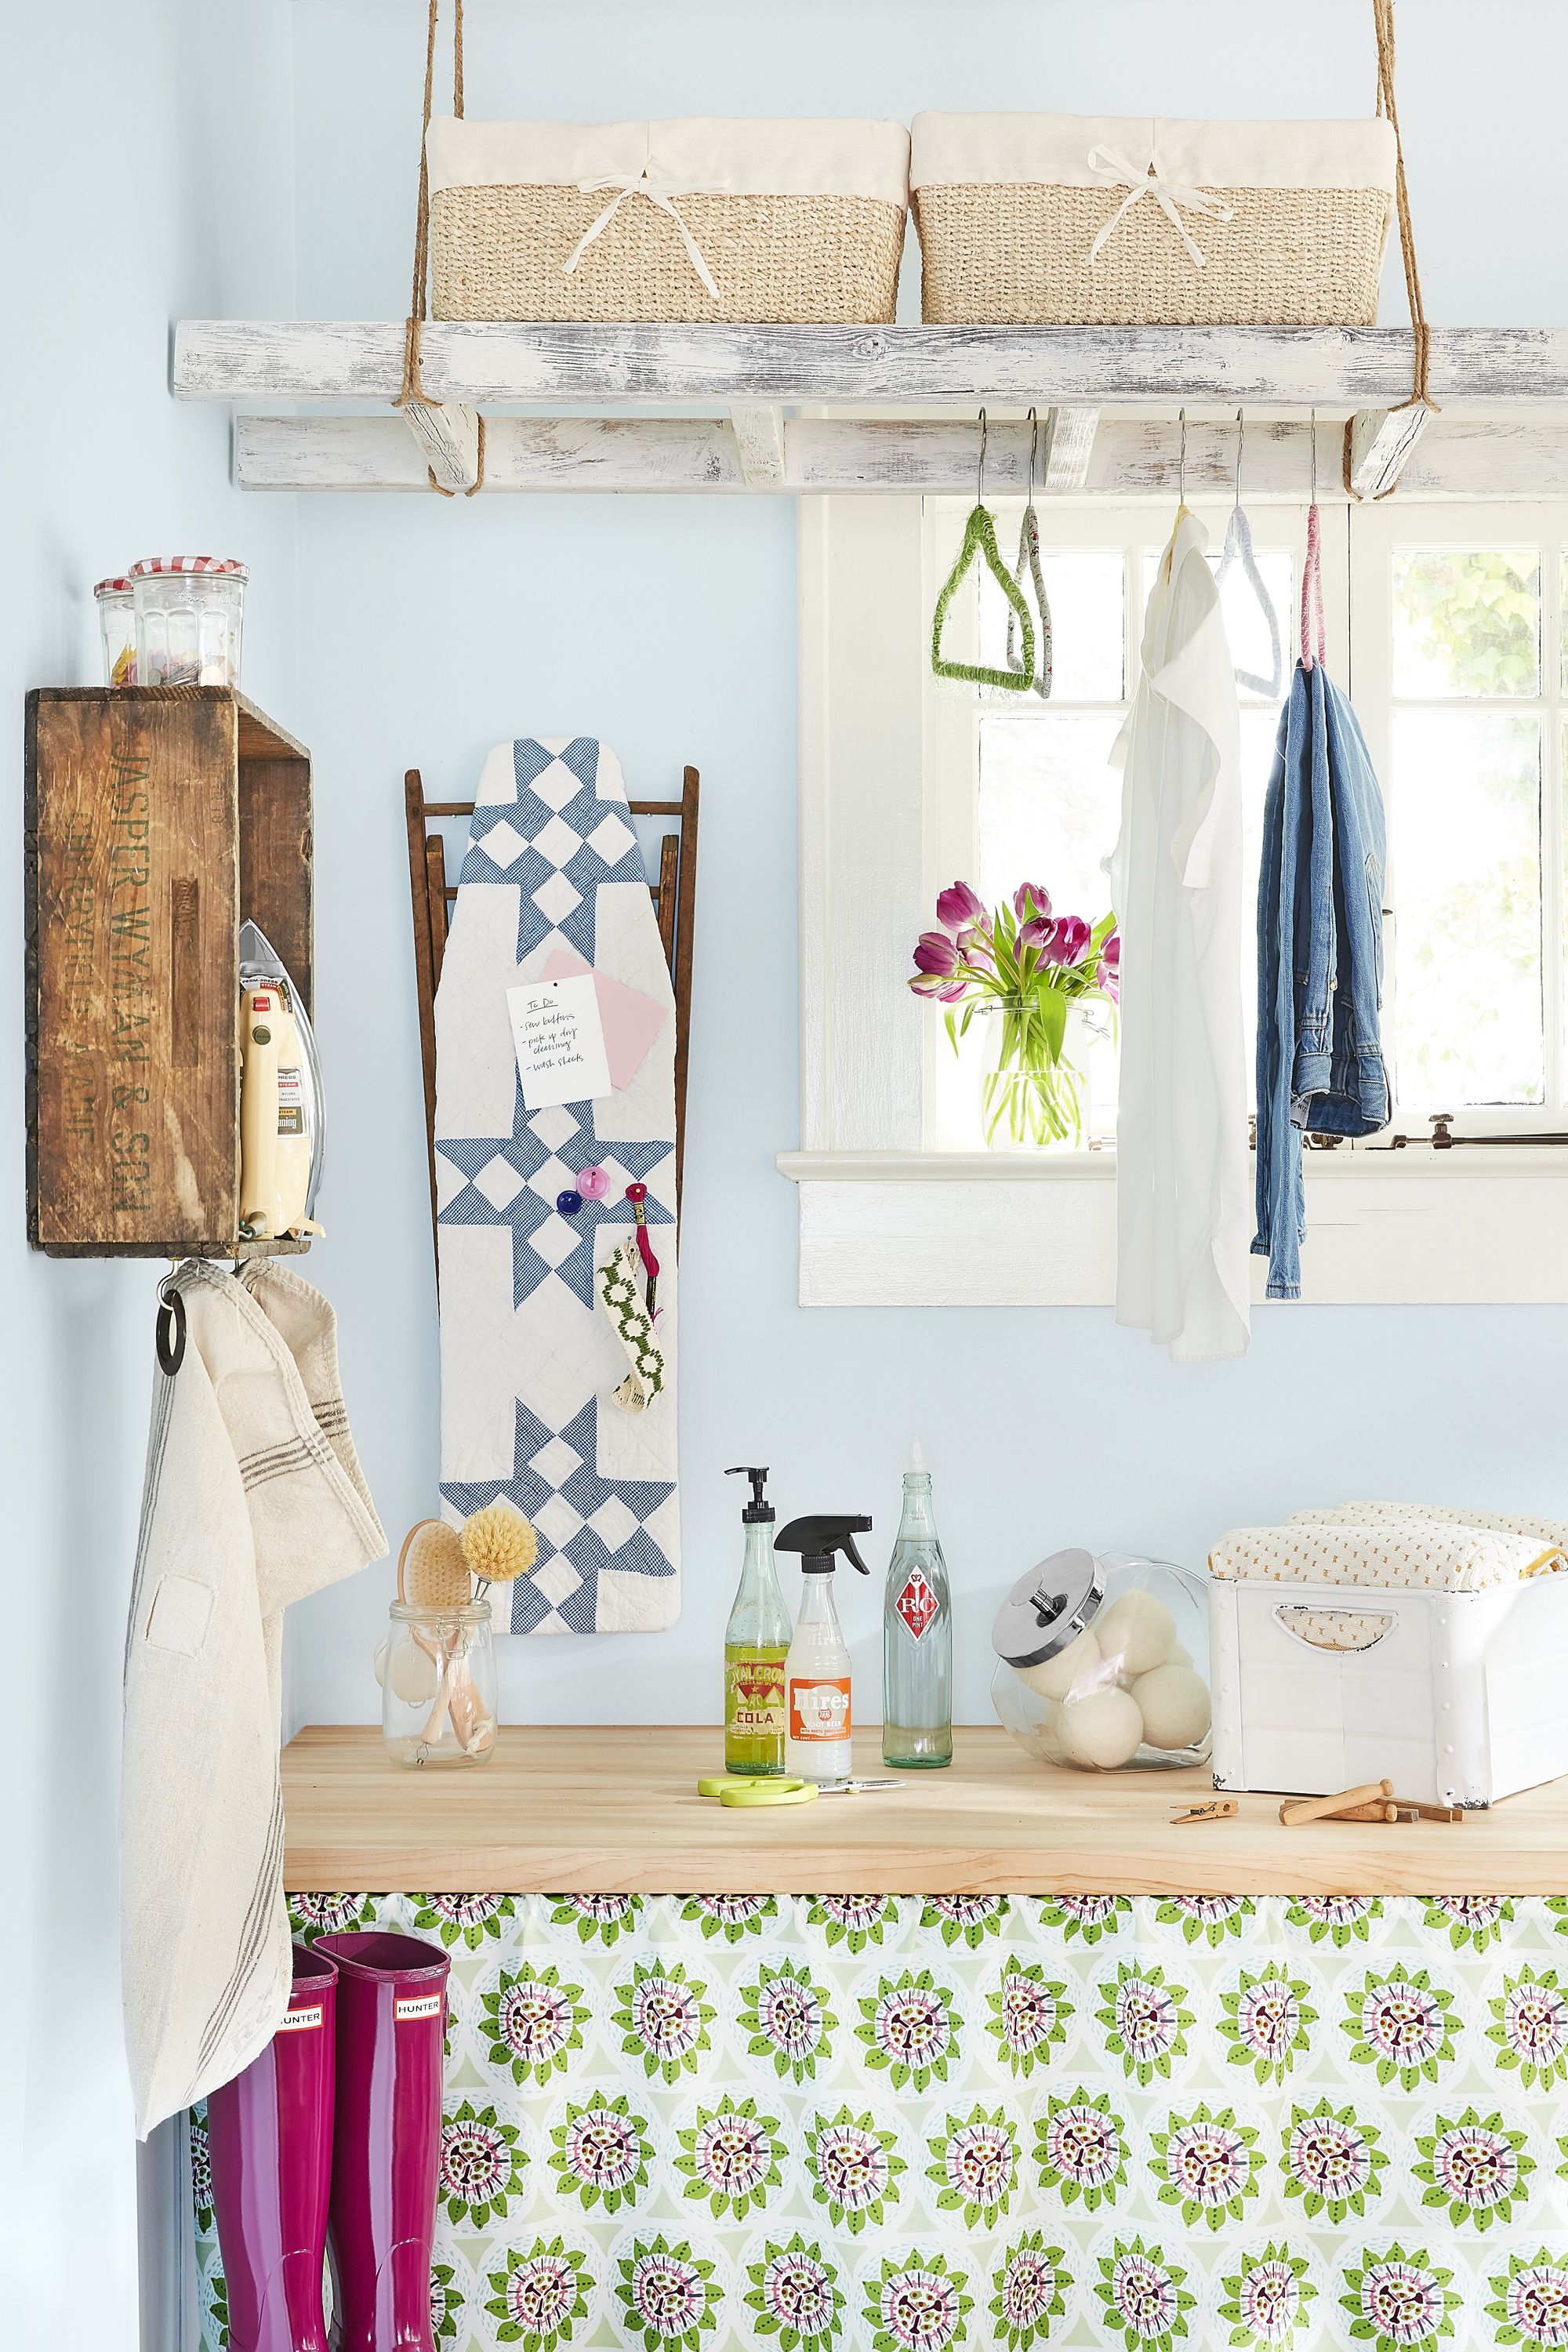 5 Laundry Room Decorating Ideas - How to Decorate